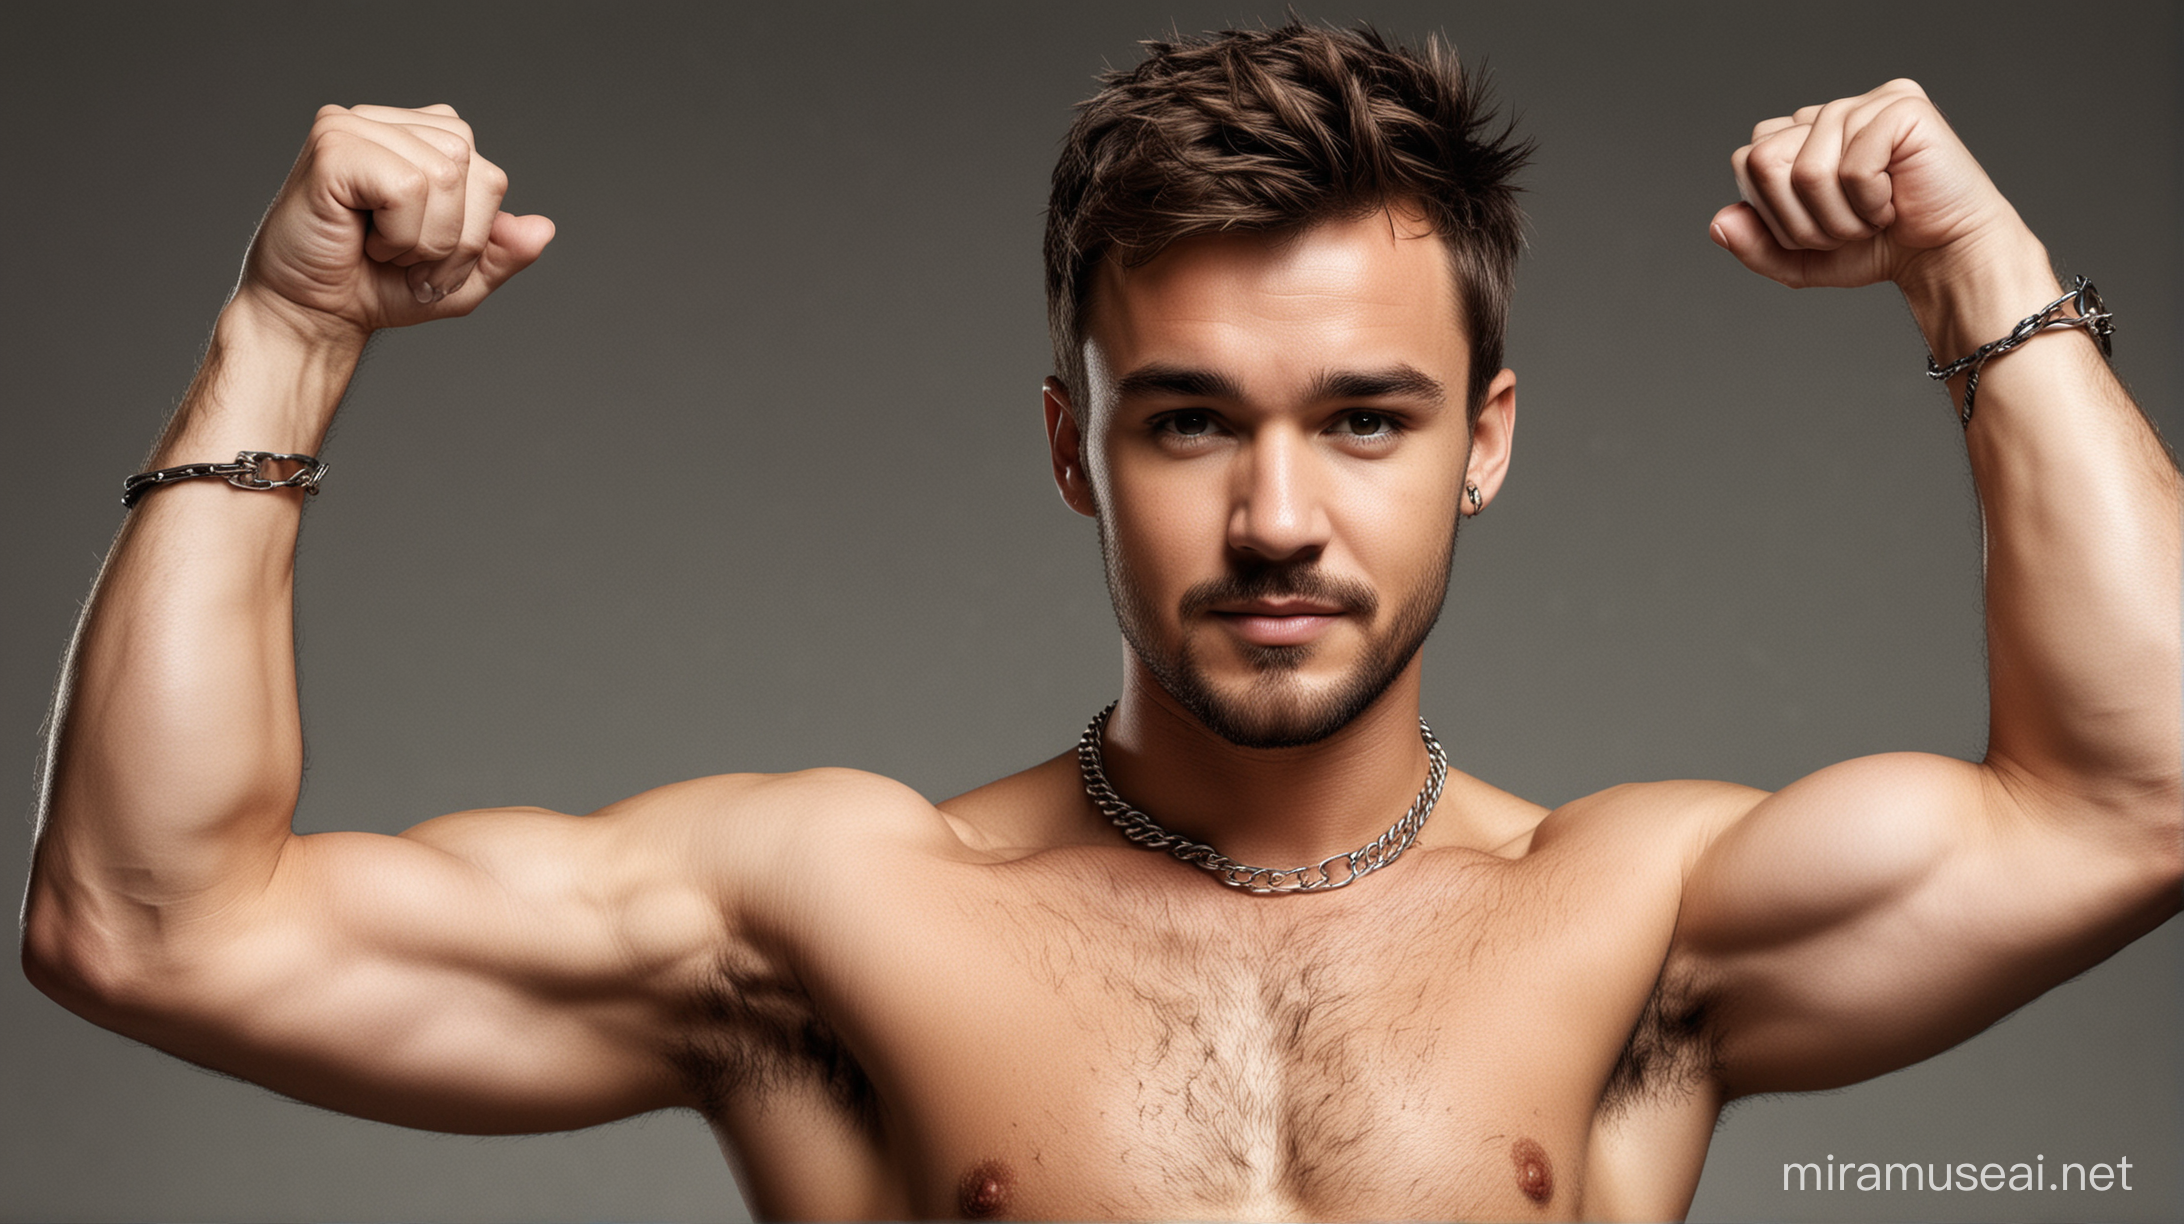 Muscular Liam Payne in Chains Displaying Hairy Armpits